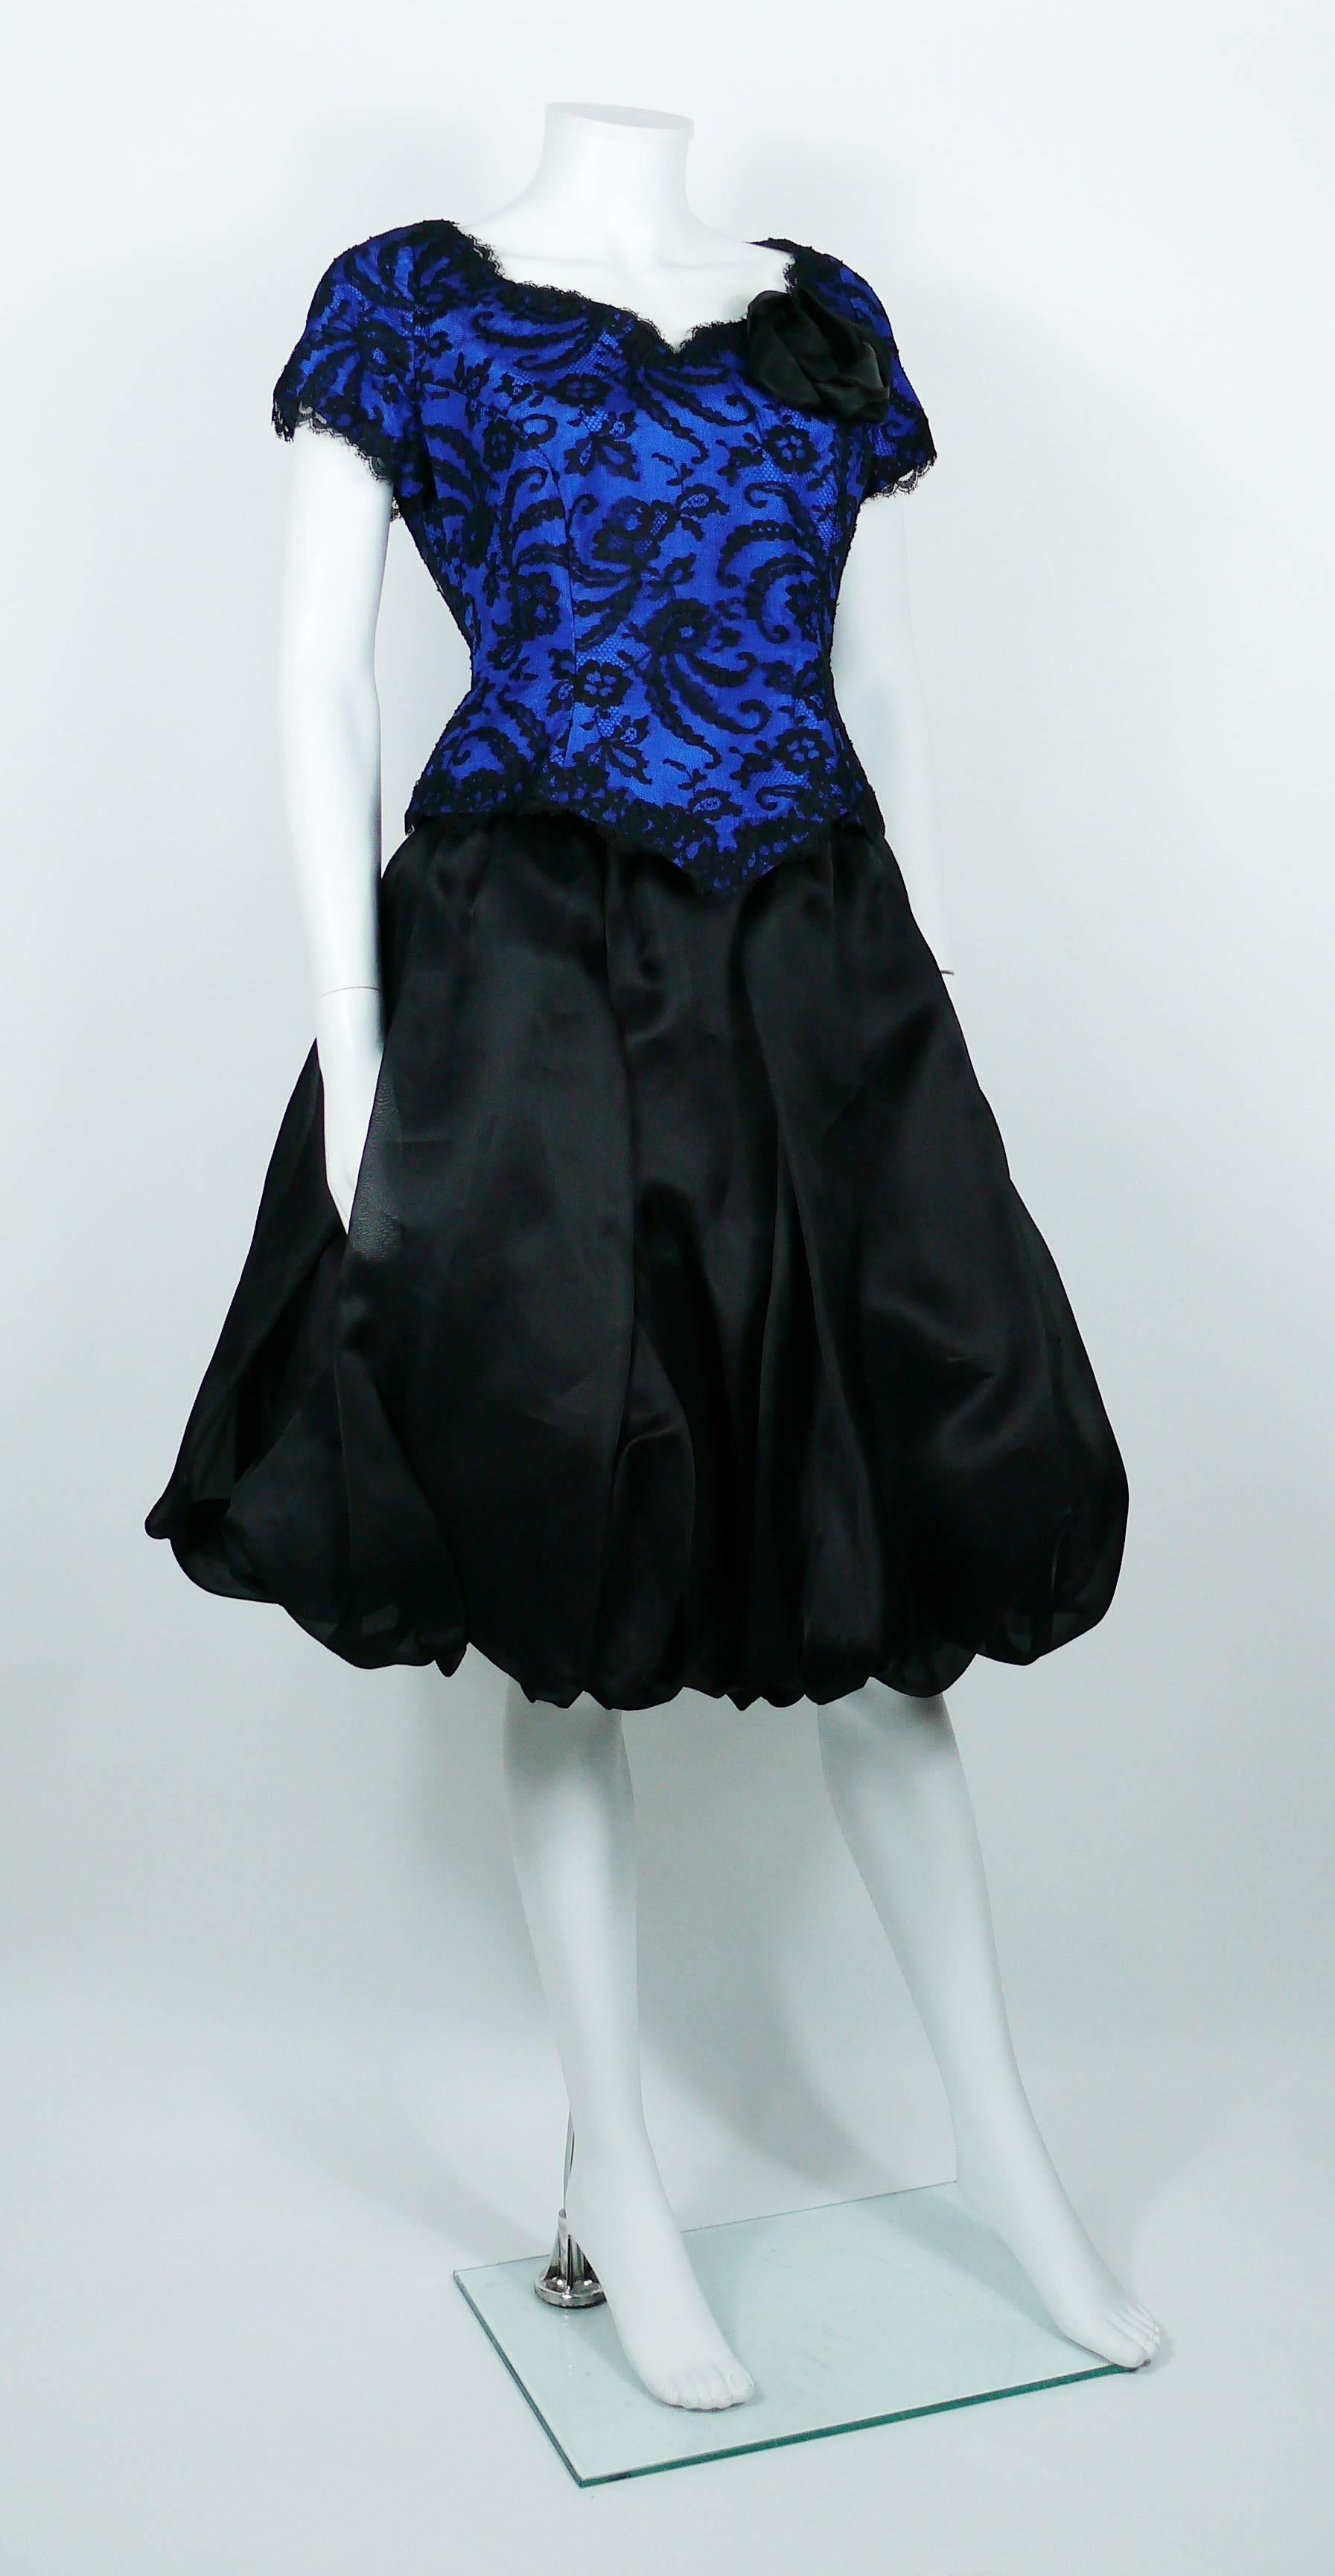 CHRISTIAN LACROIX vintage cocktail ensemble featuring a blue satin lace overlay bustier and a black organza puffball skirt.

BUSTIER features :
- Blue satin with black lace overlay.
- Black satin flower.
- Short sleeves. 
- Hidden back zipper.
-